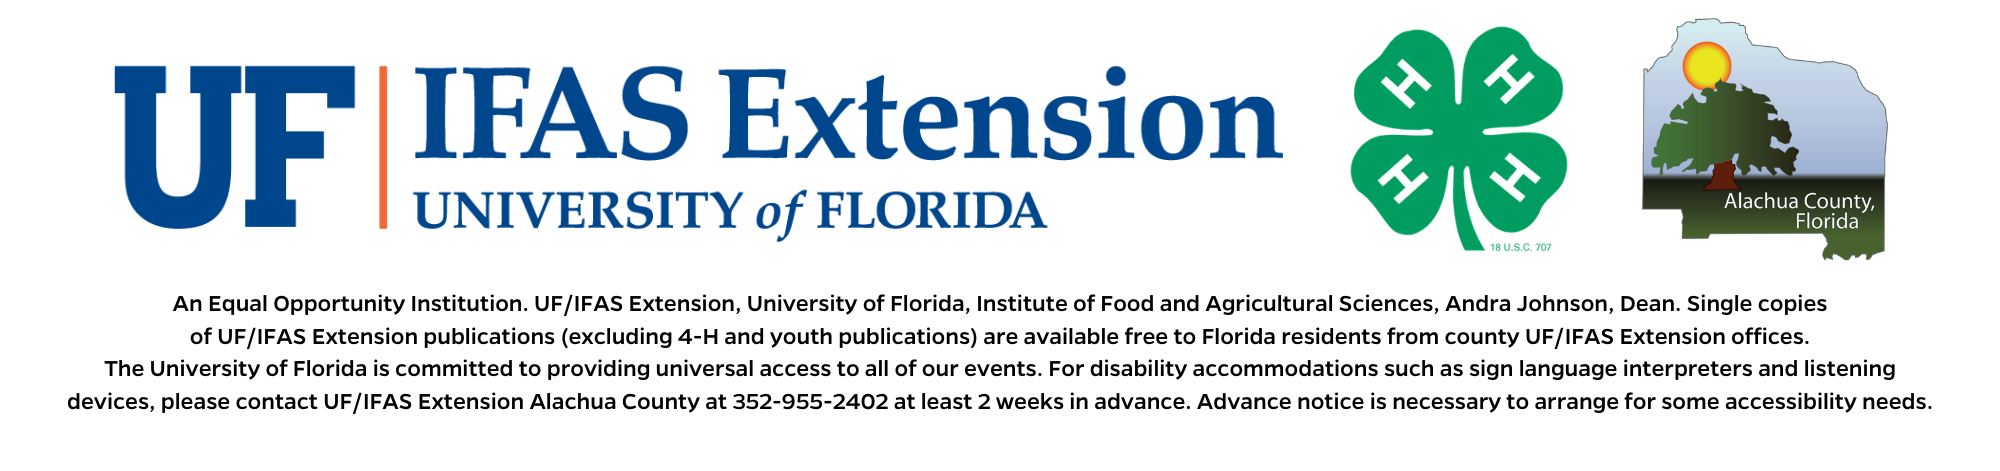 UF/IFAS Extension, 4-H, and Alachua County logos